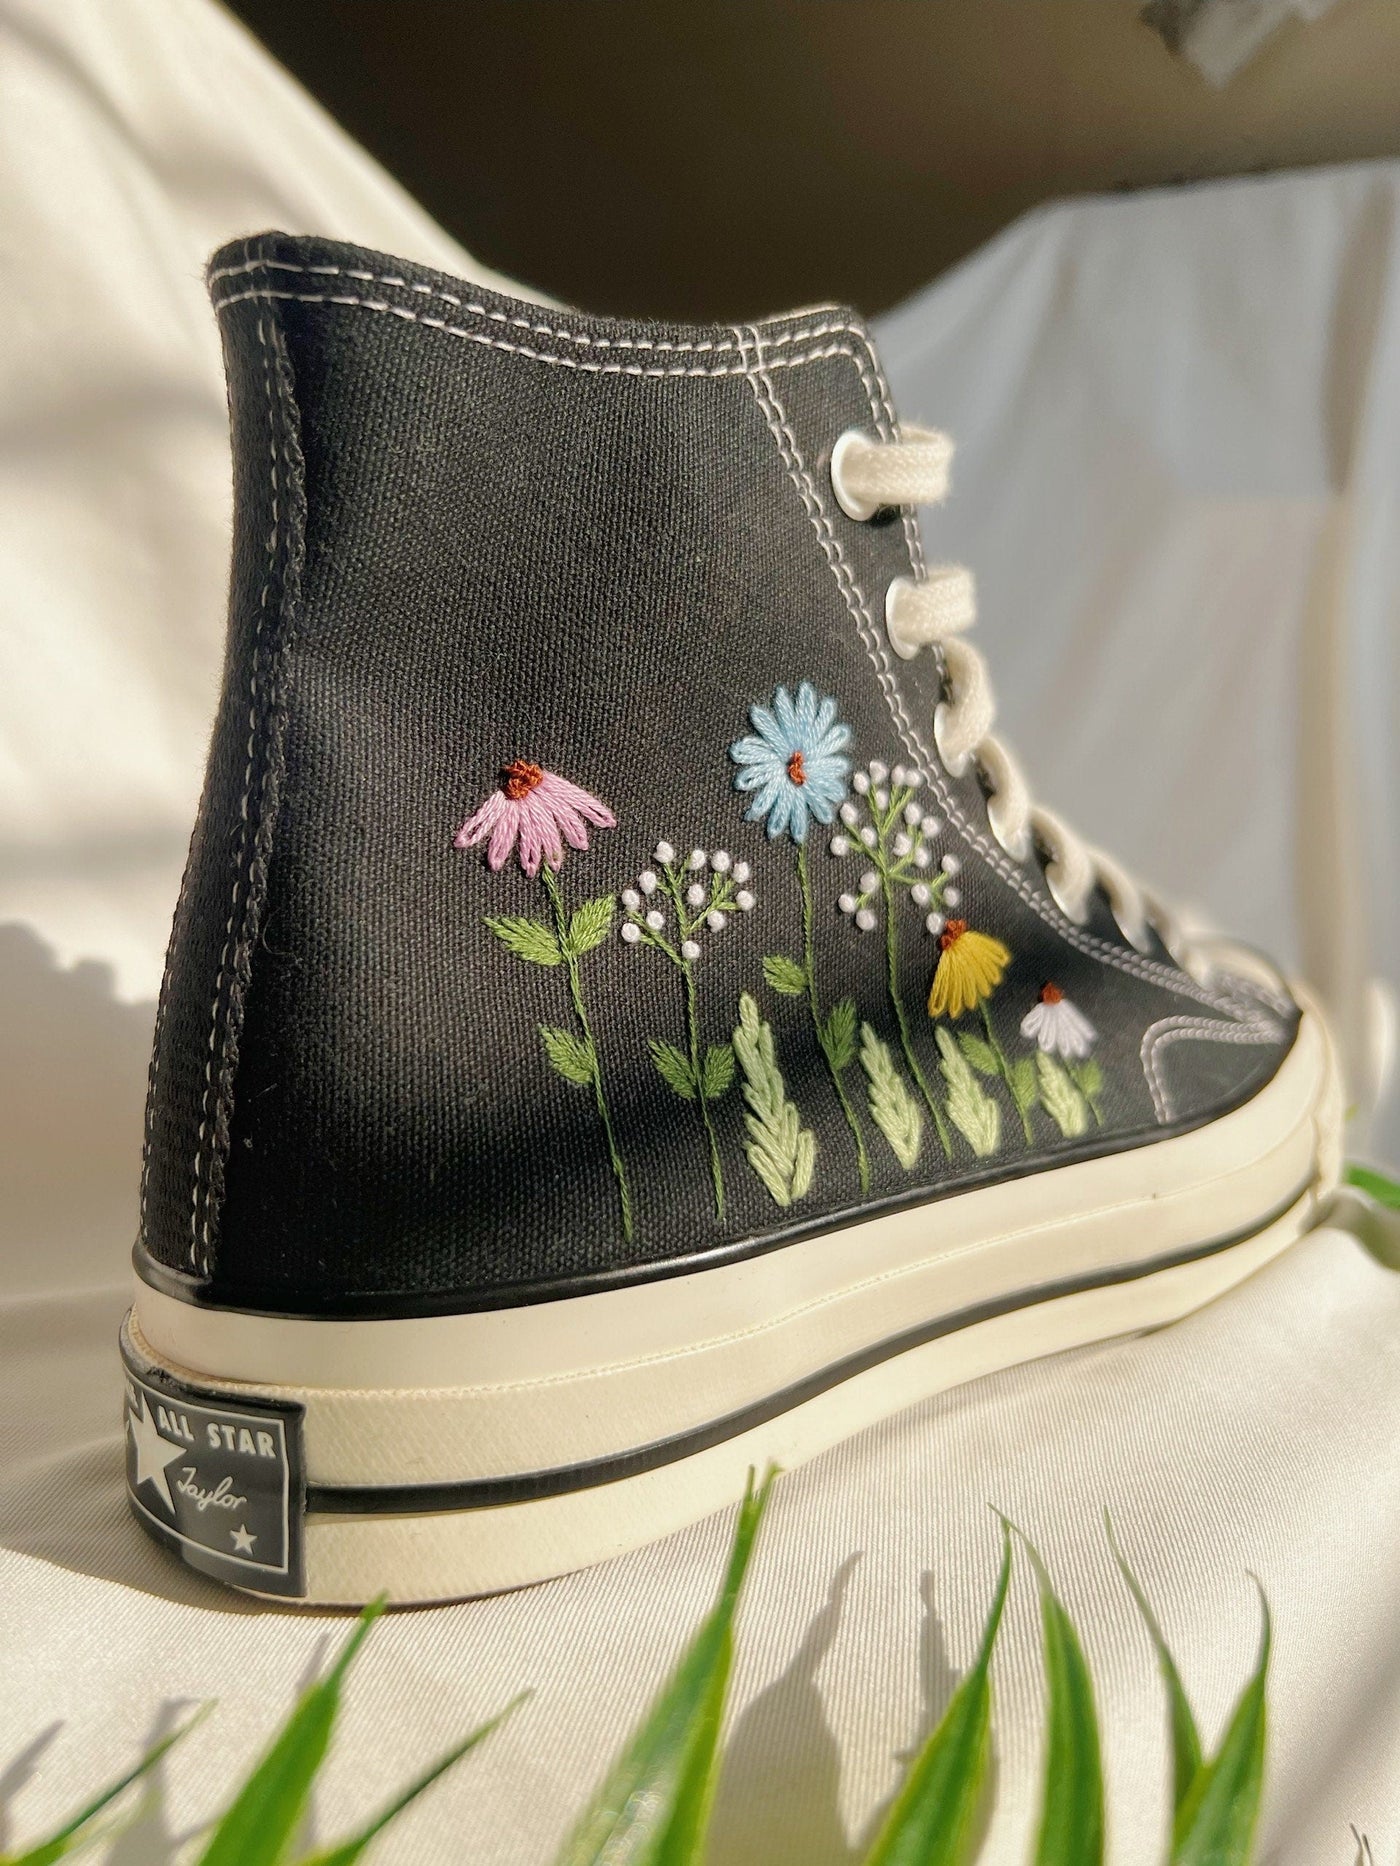 Embroidered Converse,Flower Converse,Converse Custom Colorful Daisy